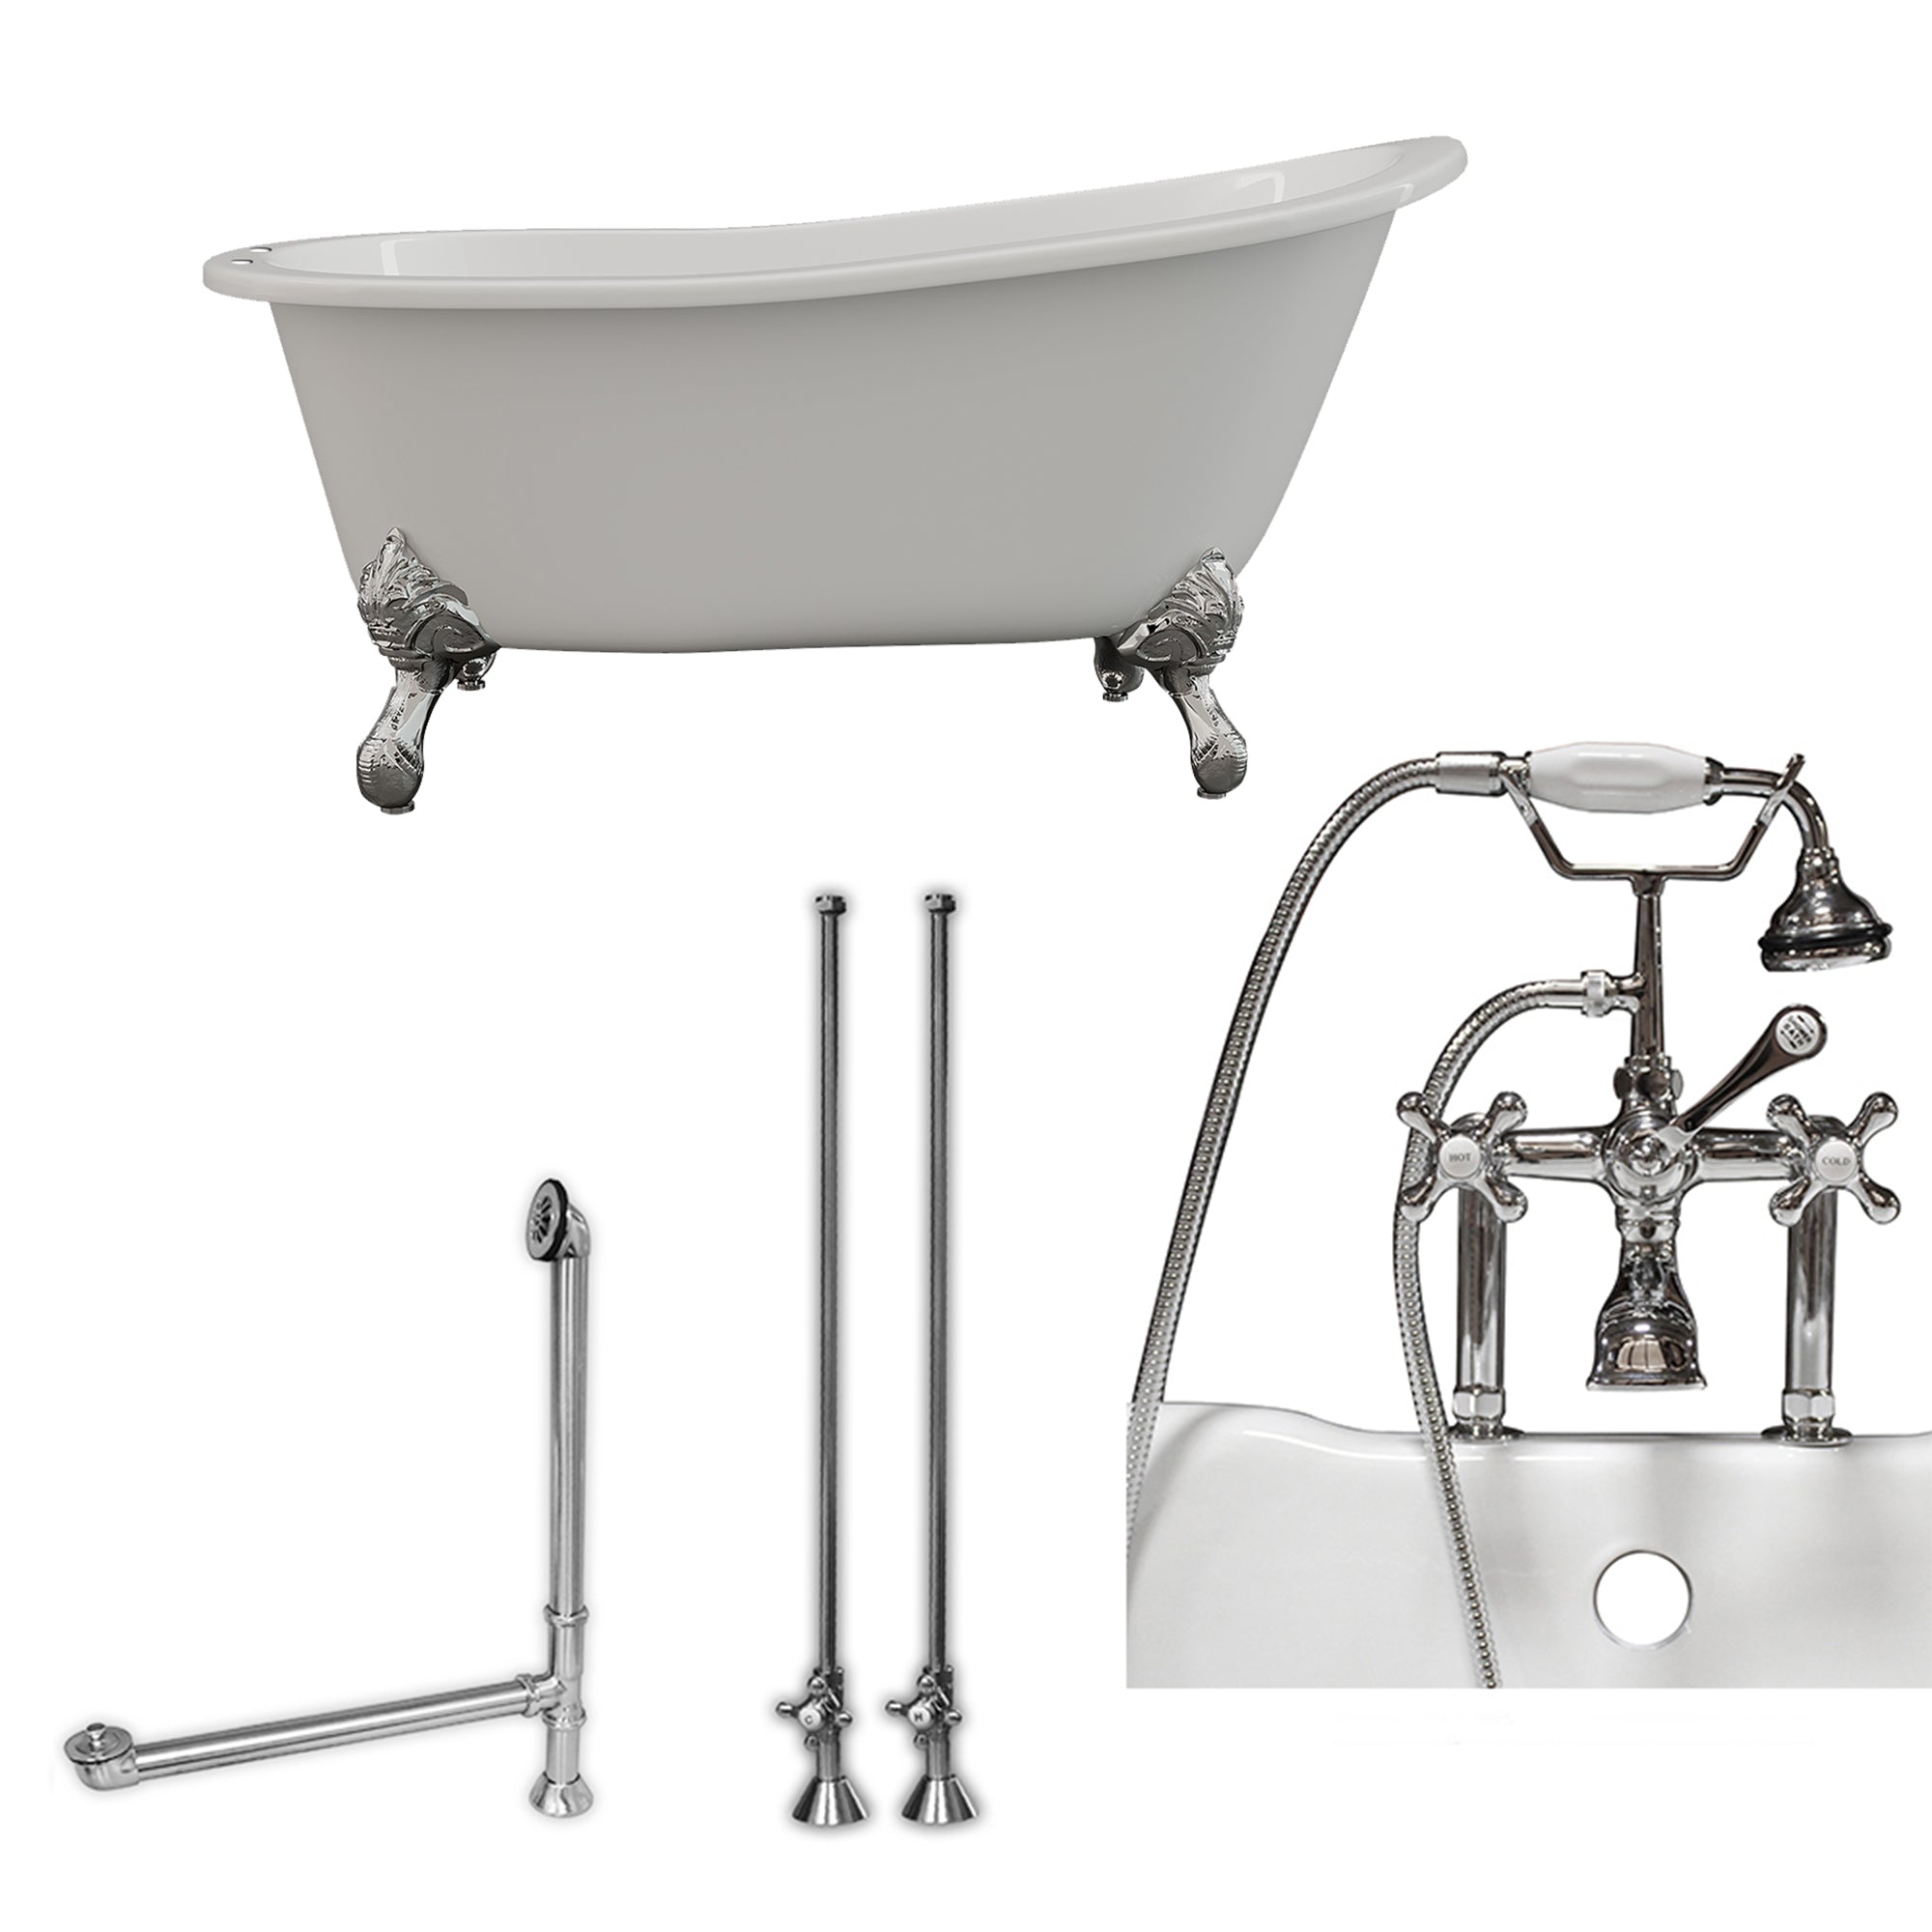 Cambridge Plumbing 61-Inch Cast Iron Slipper Clawfoot Tub (Porcelain enamel interior and white paint exterior) and Deck Mount Plumbing Package (Brushed Nickel) ST61-463D-6-PKG-7DH - Vital Hydrotherapy